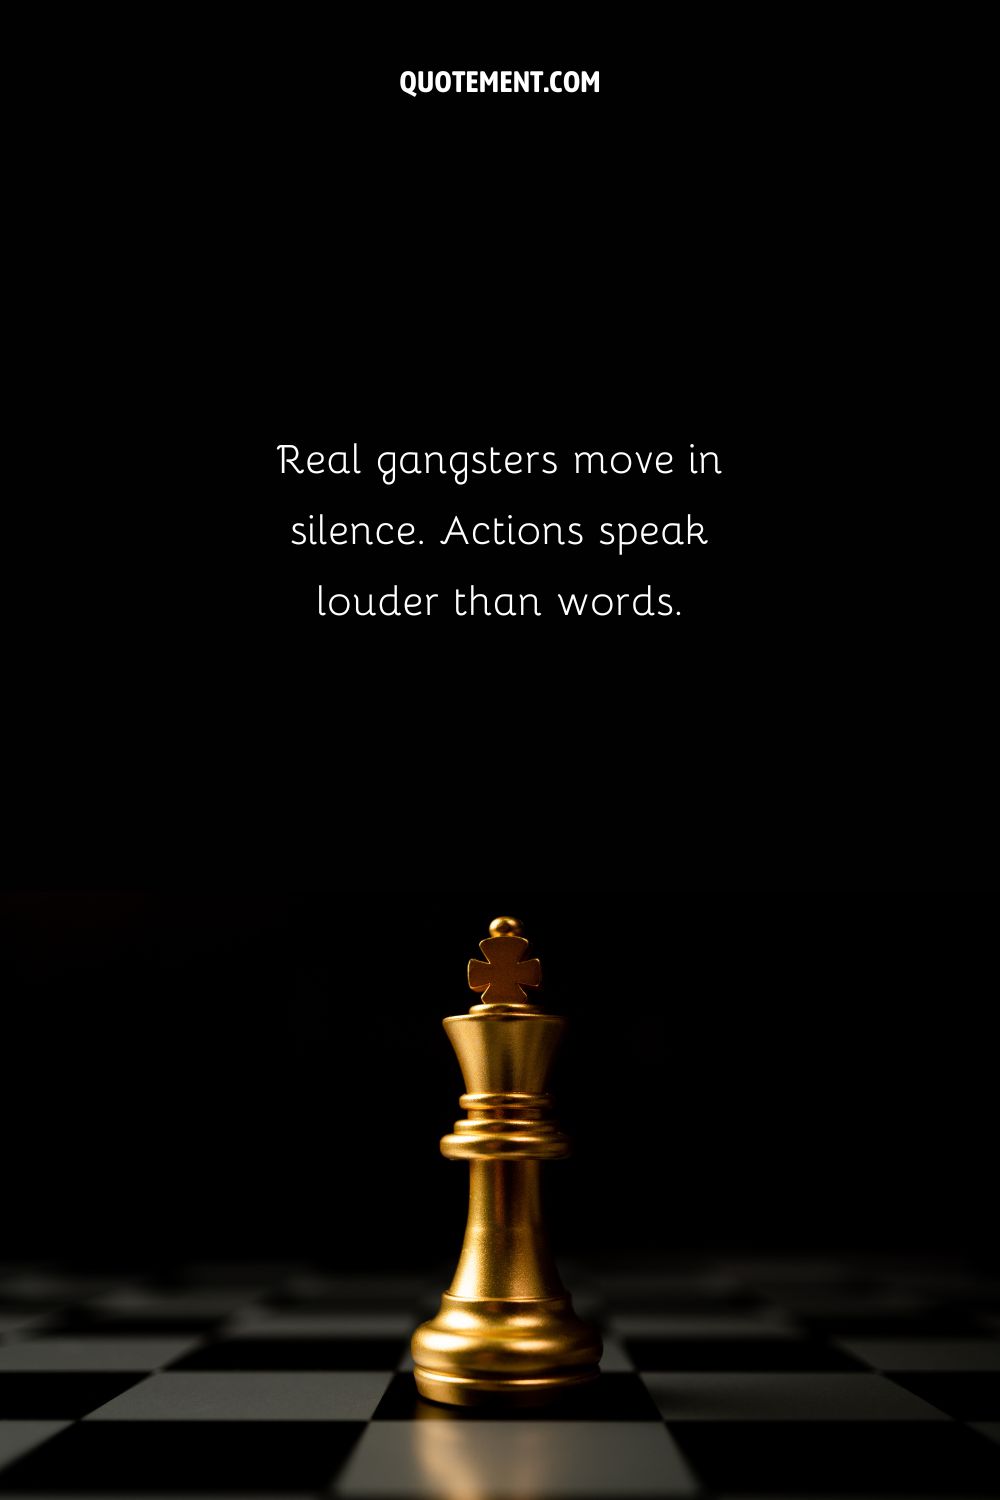 Real gangsters move in silence. Actions speak louder than words